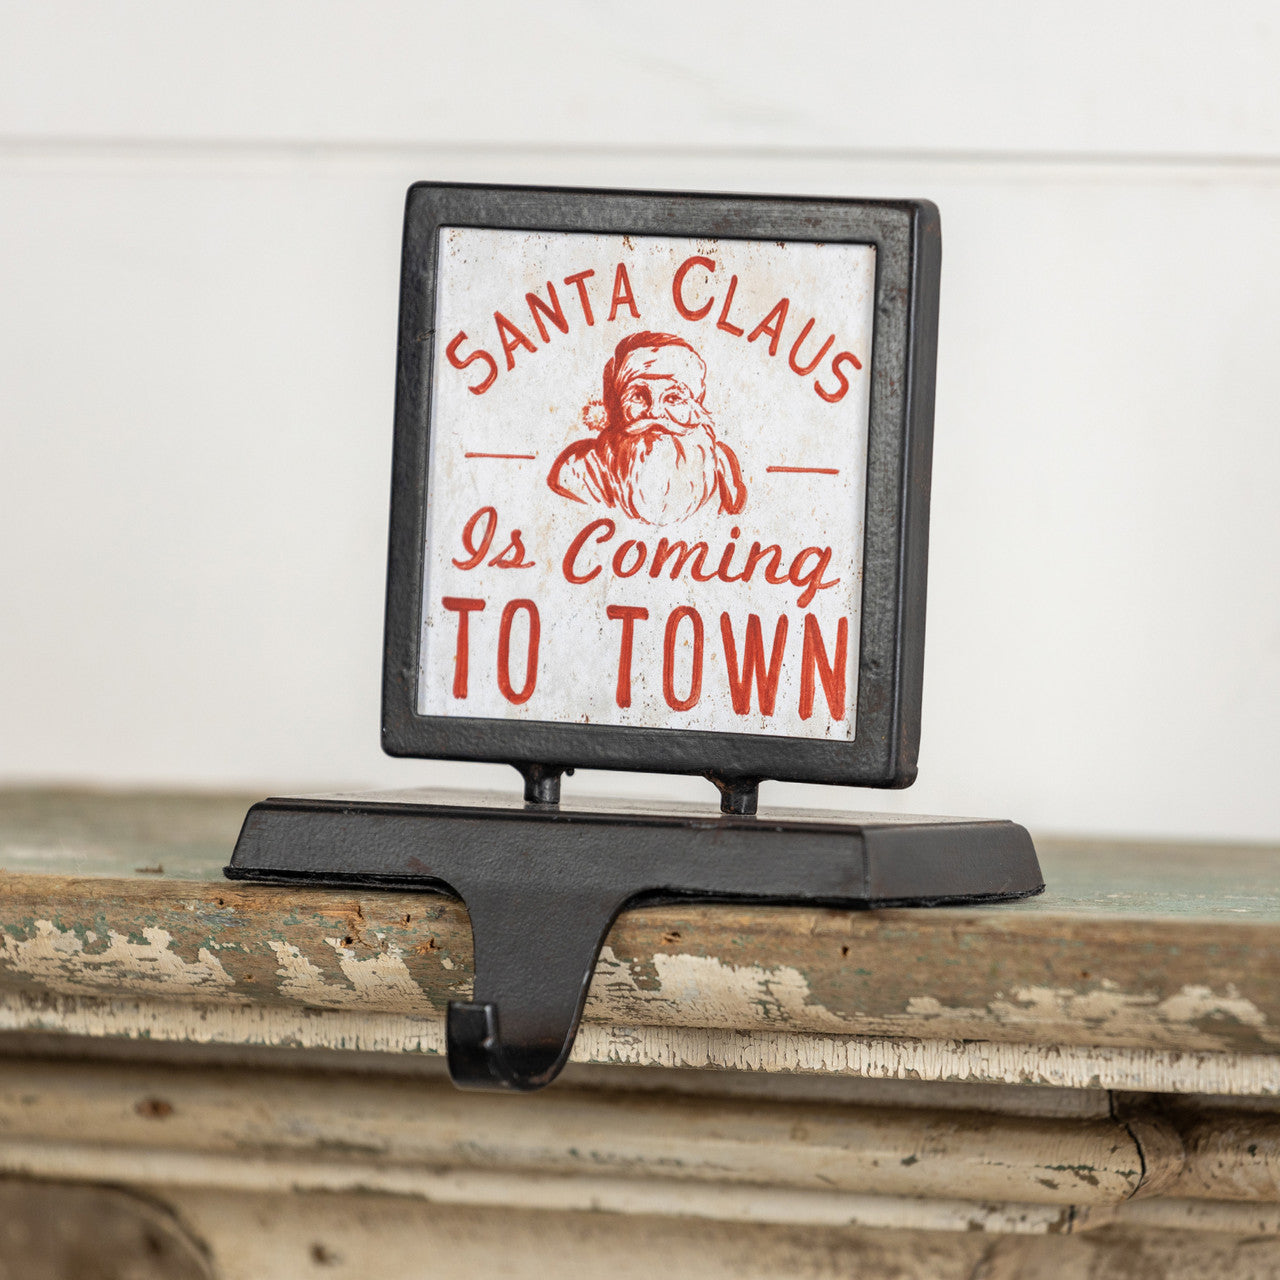 Cast Iron Santa Claus Is Coming To Town Stocking Holder